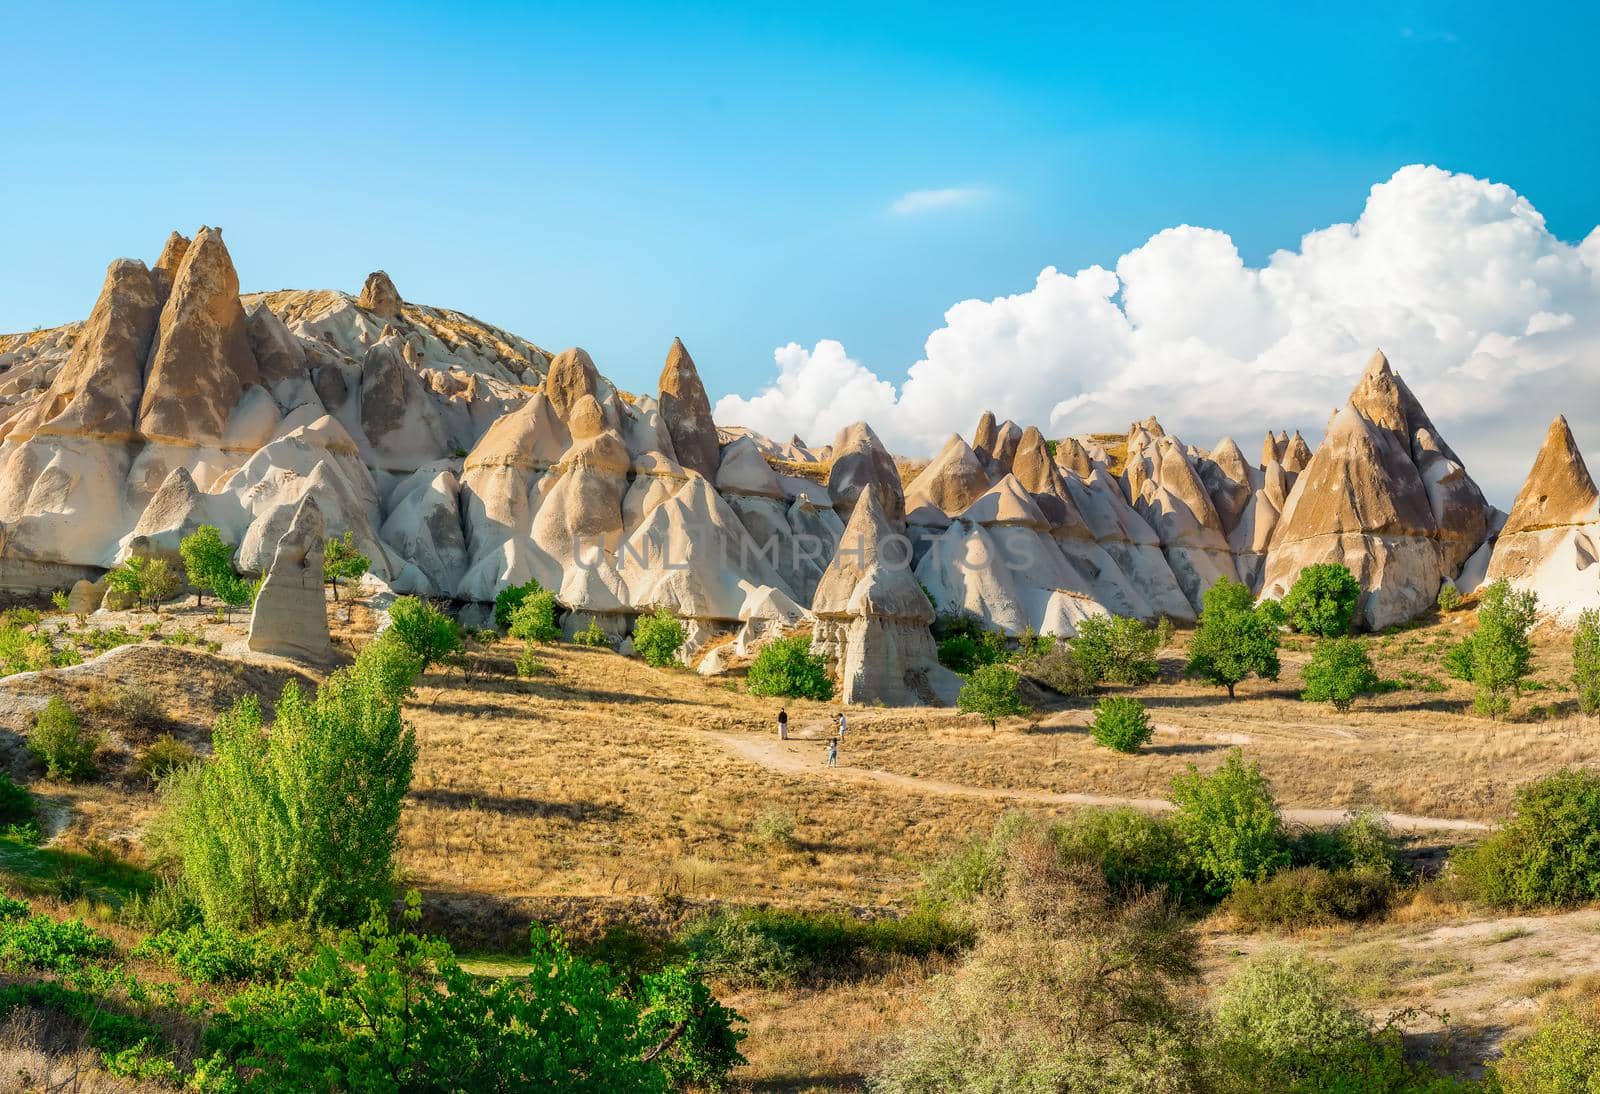 This is Goreme National Park by Givaga